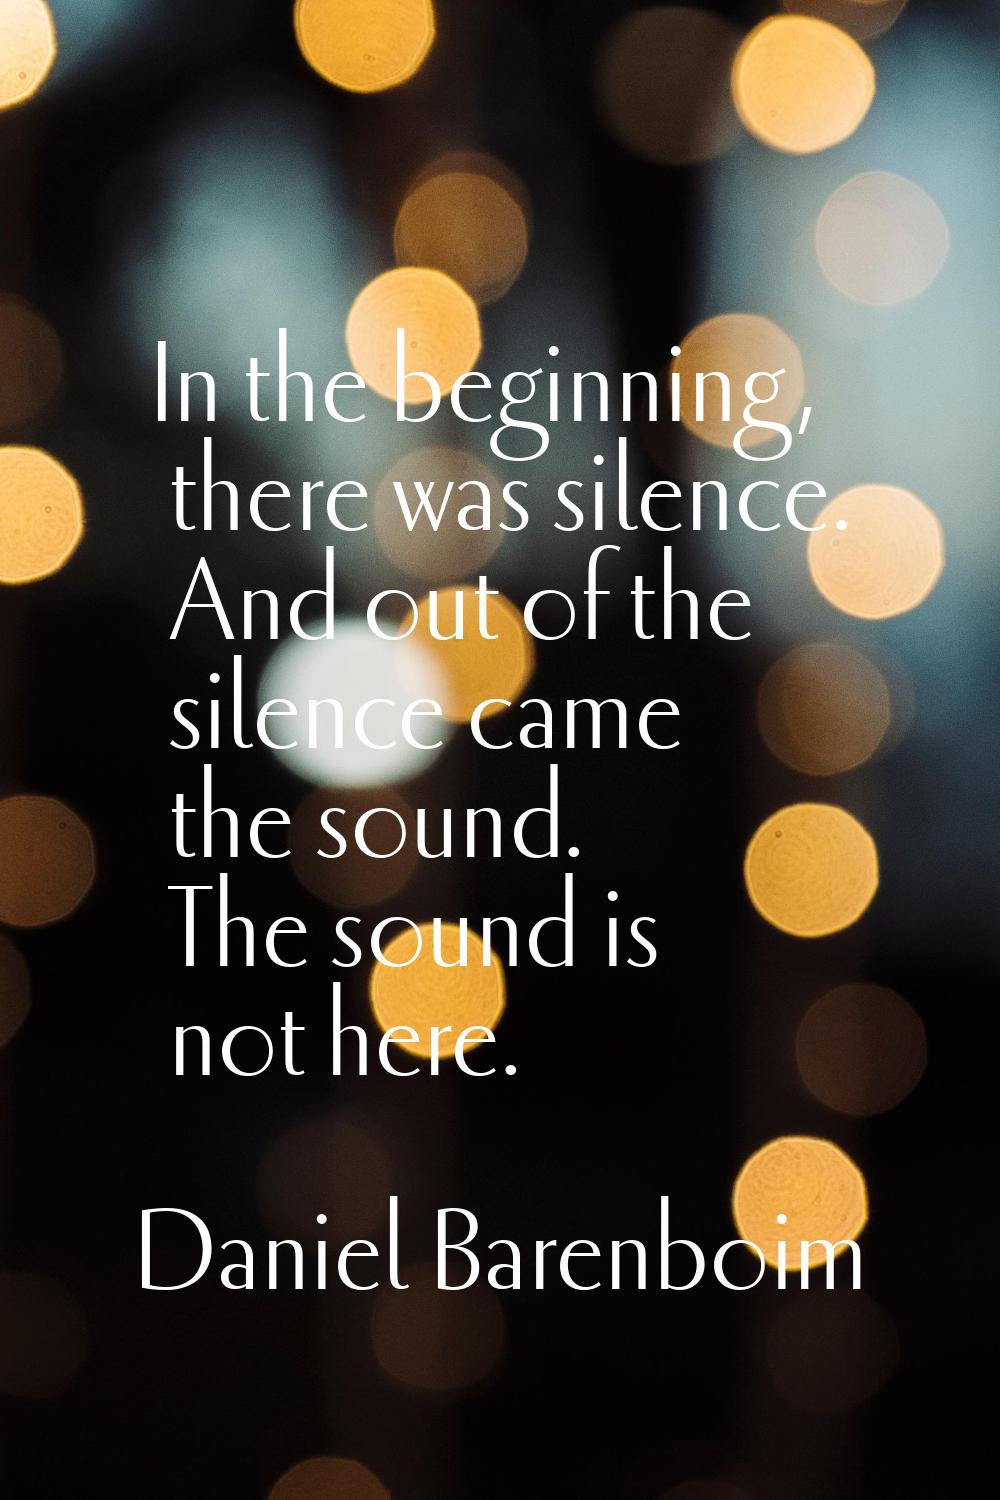 In the beginning, there was silence. And out of the silence came the sound. The sound is not here.